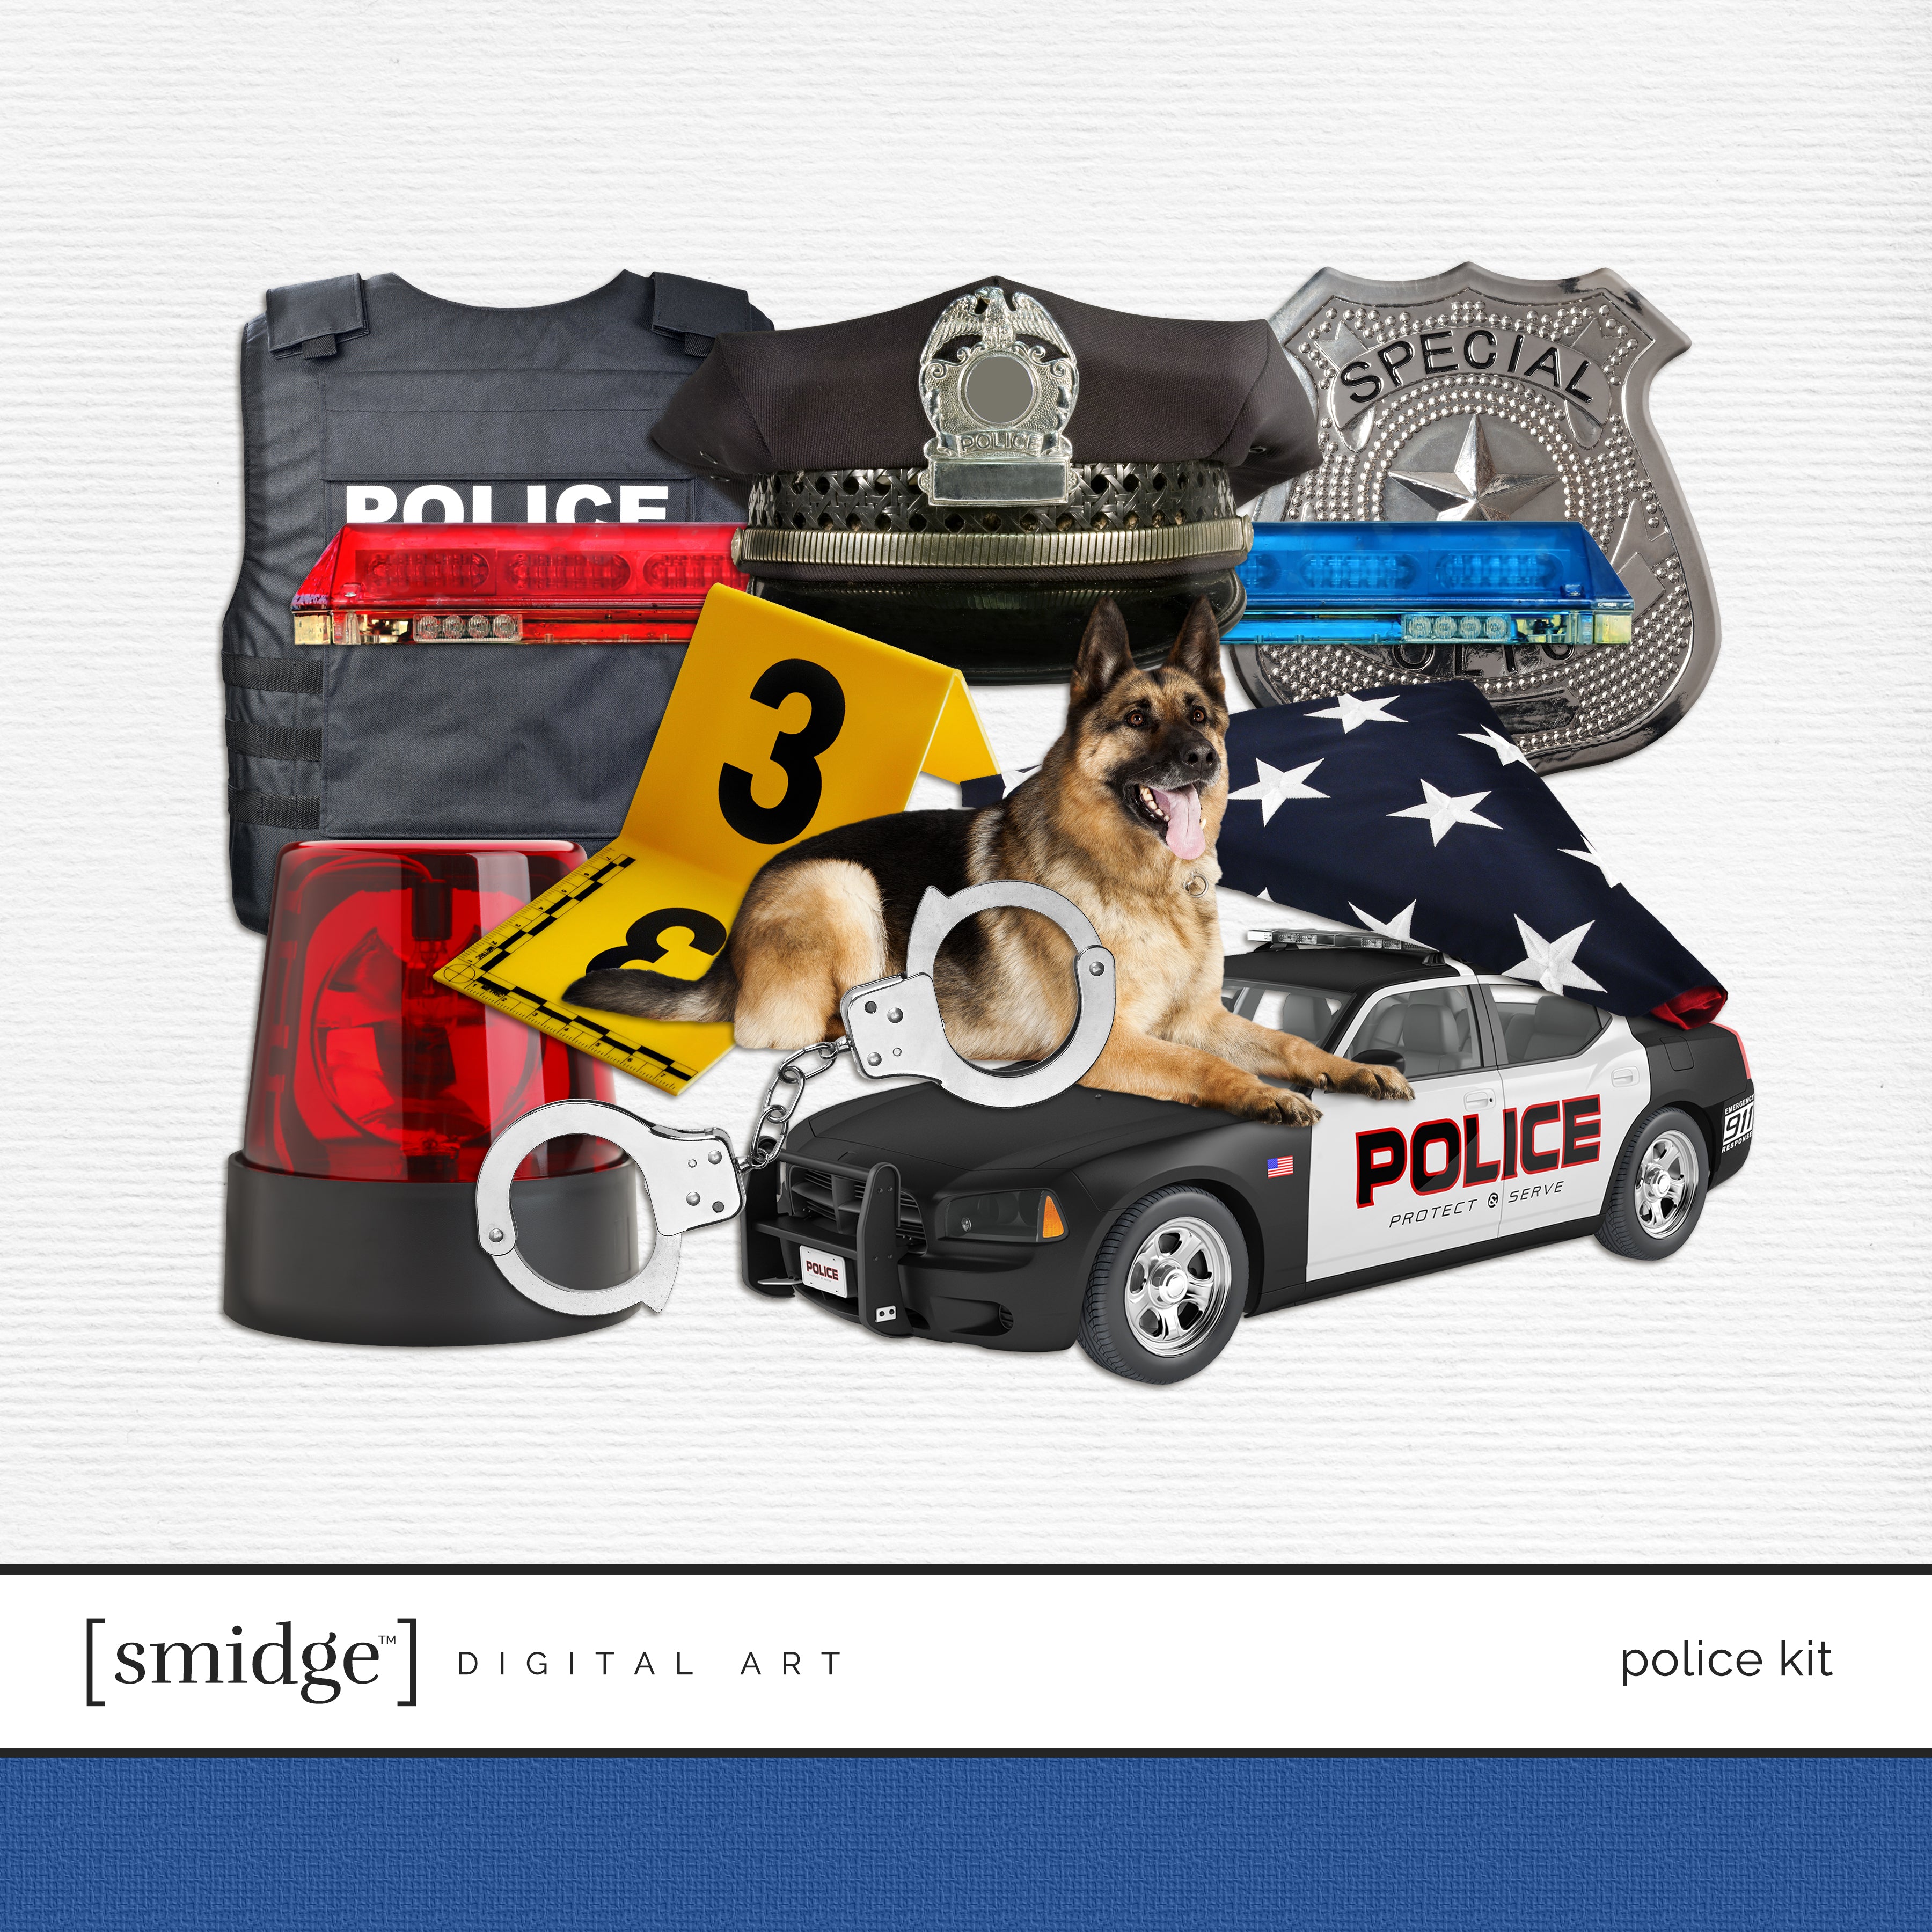 Let's celebrate real heroes who choose to protect and serve our community everyday. Pick up this realistic Police Digital Scrapbooking Kit filled with a perfect smidge of digital art elements.  Digital embellishments include a police vest, police hat, police badge, red siren light, police squad car, handcuffs, siren bar, investigation number marker, and German Shepherd dog.